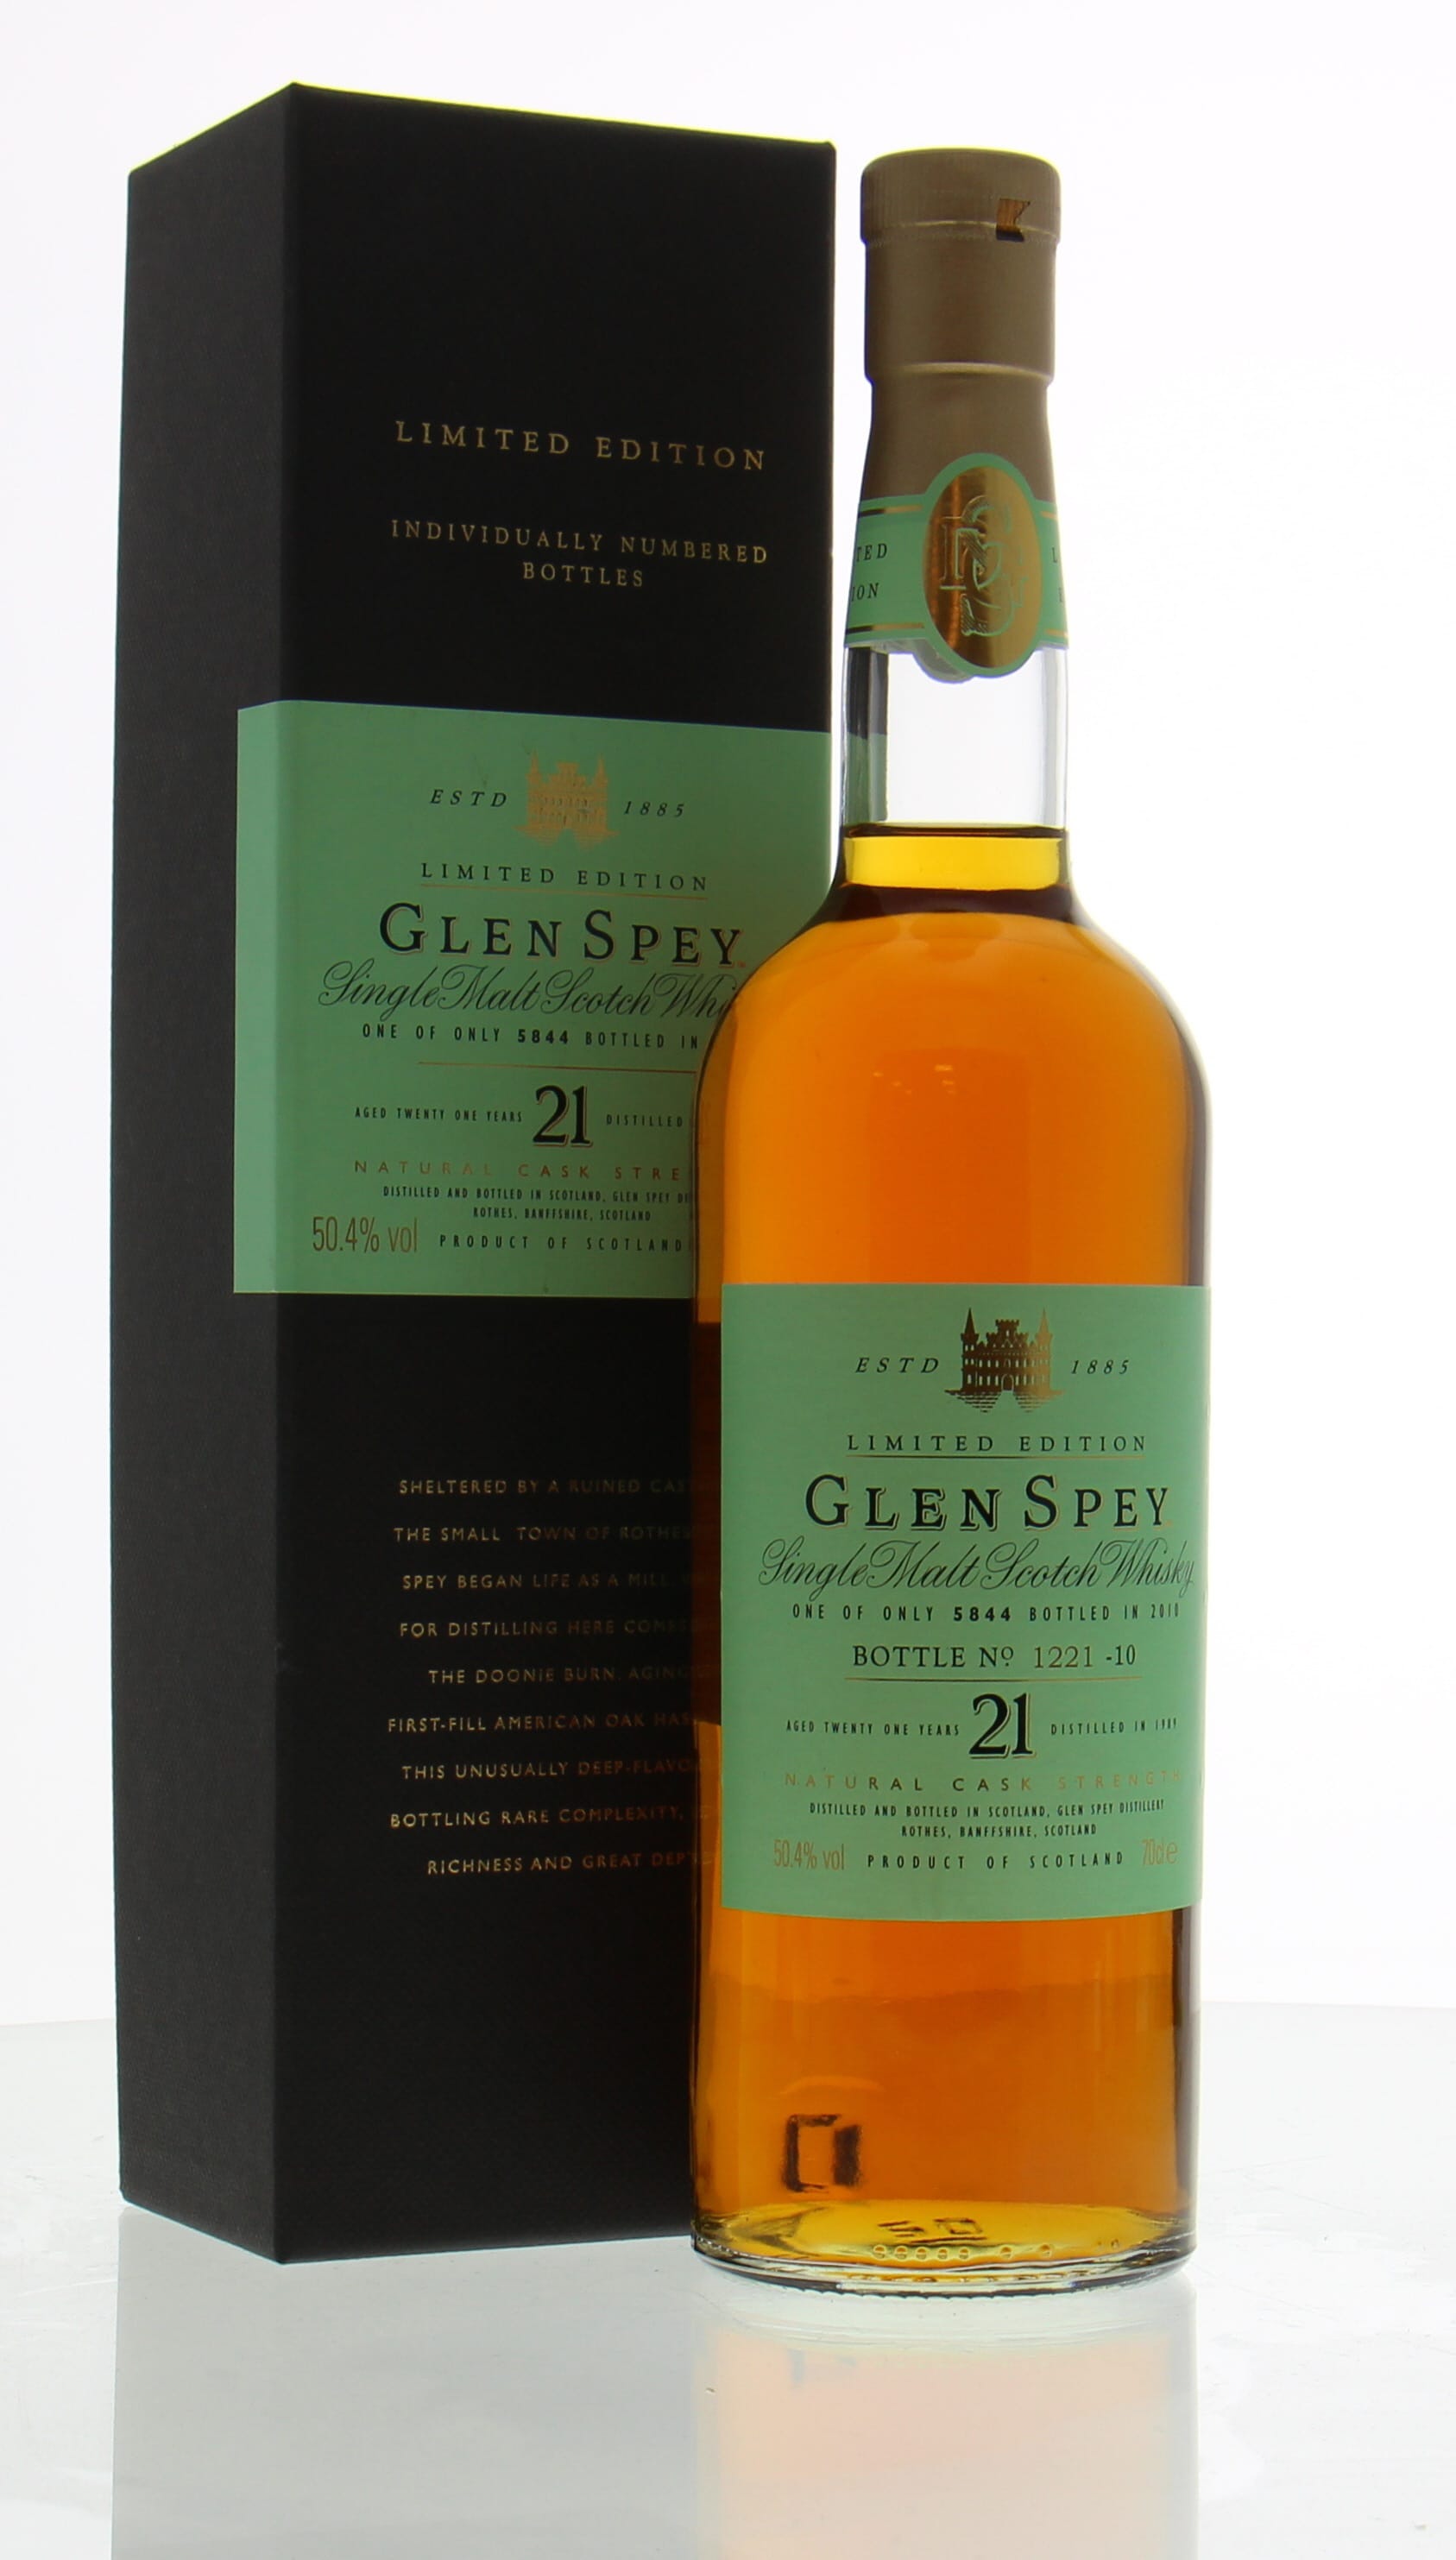 Glen Spey - 21 Years Old Limited Edition 50.4% 1989 In Original Container